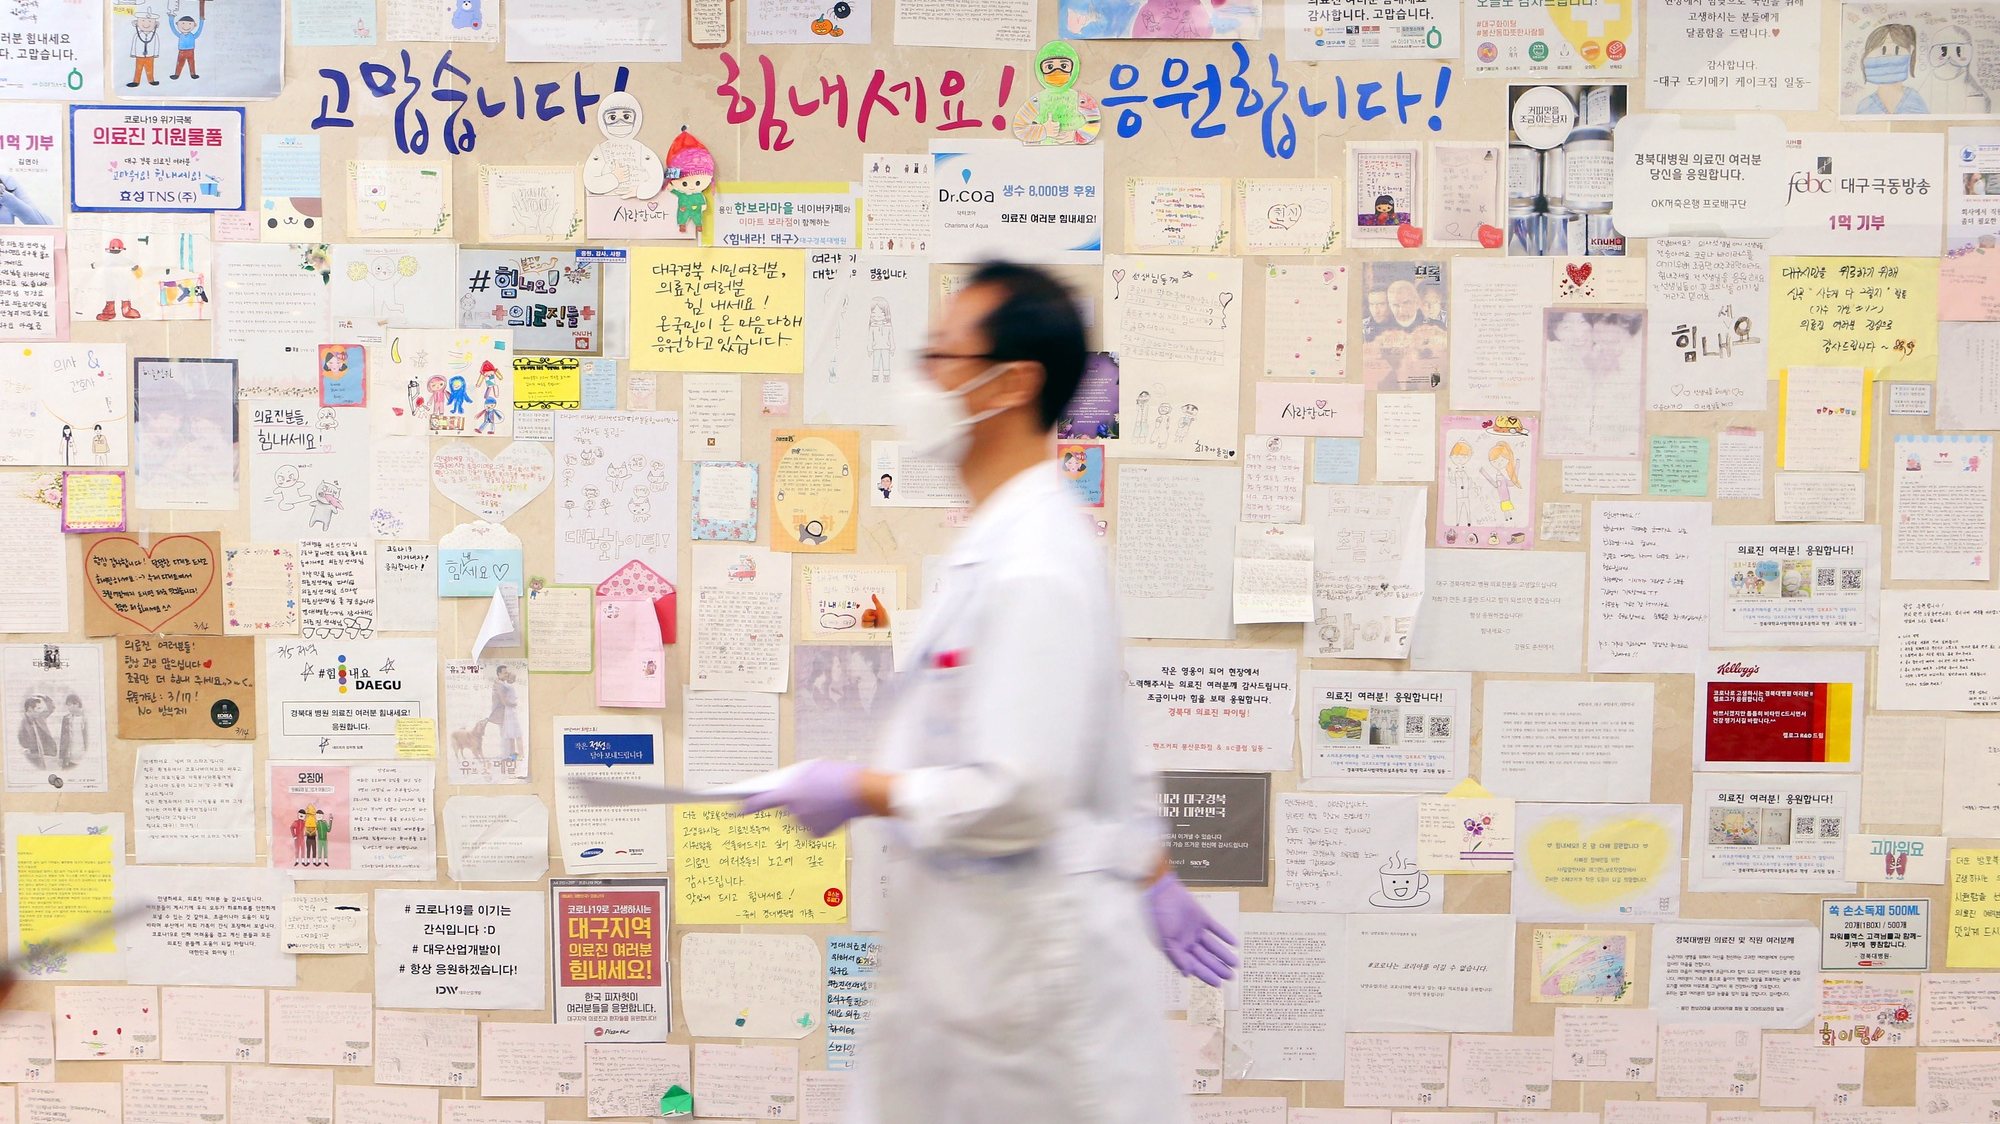 epa09660978 A doctor walks past a wall full of messages cheering medical workers grappling with Covid-19 at Kyungpook National University Hospital in Daegu, South Korea, 31 December 2021.  EPA/YONHAP SOUTH KOREA OUT